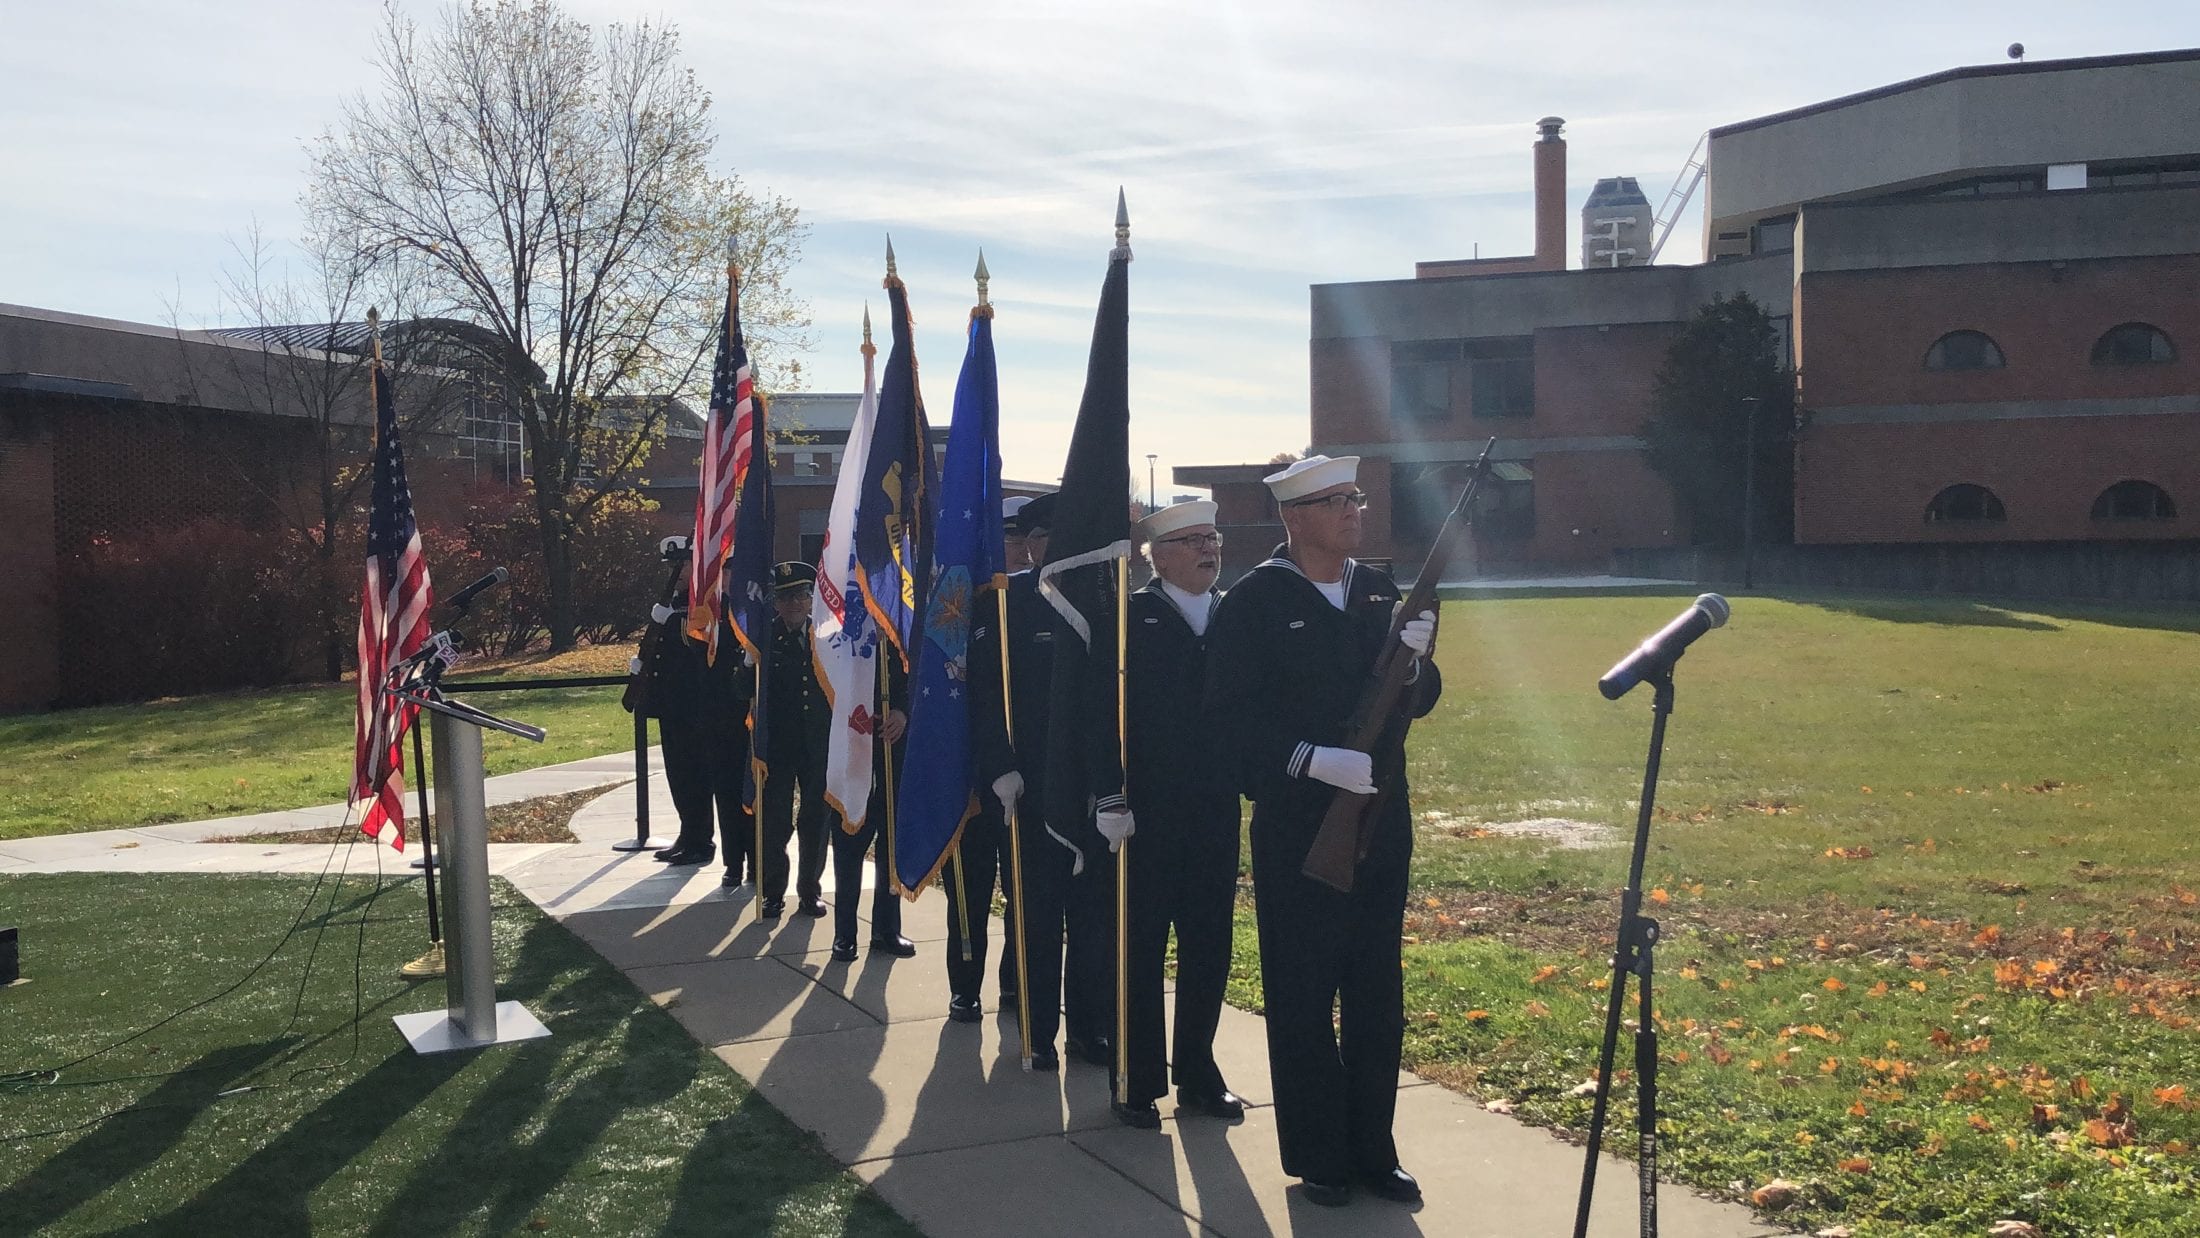 Honoring service: SUNY Broome holds Veterans Day ceremony